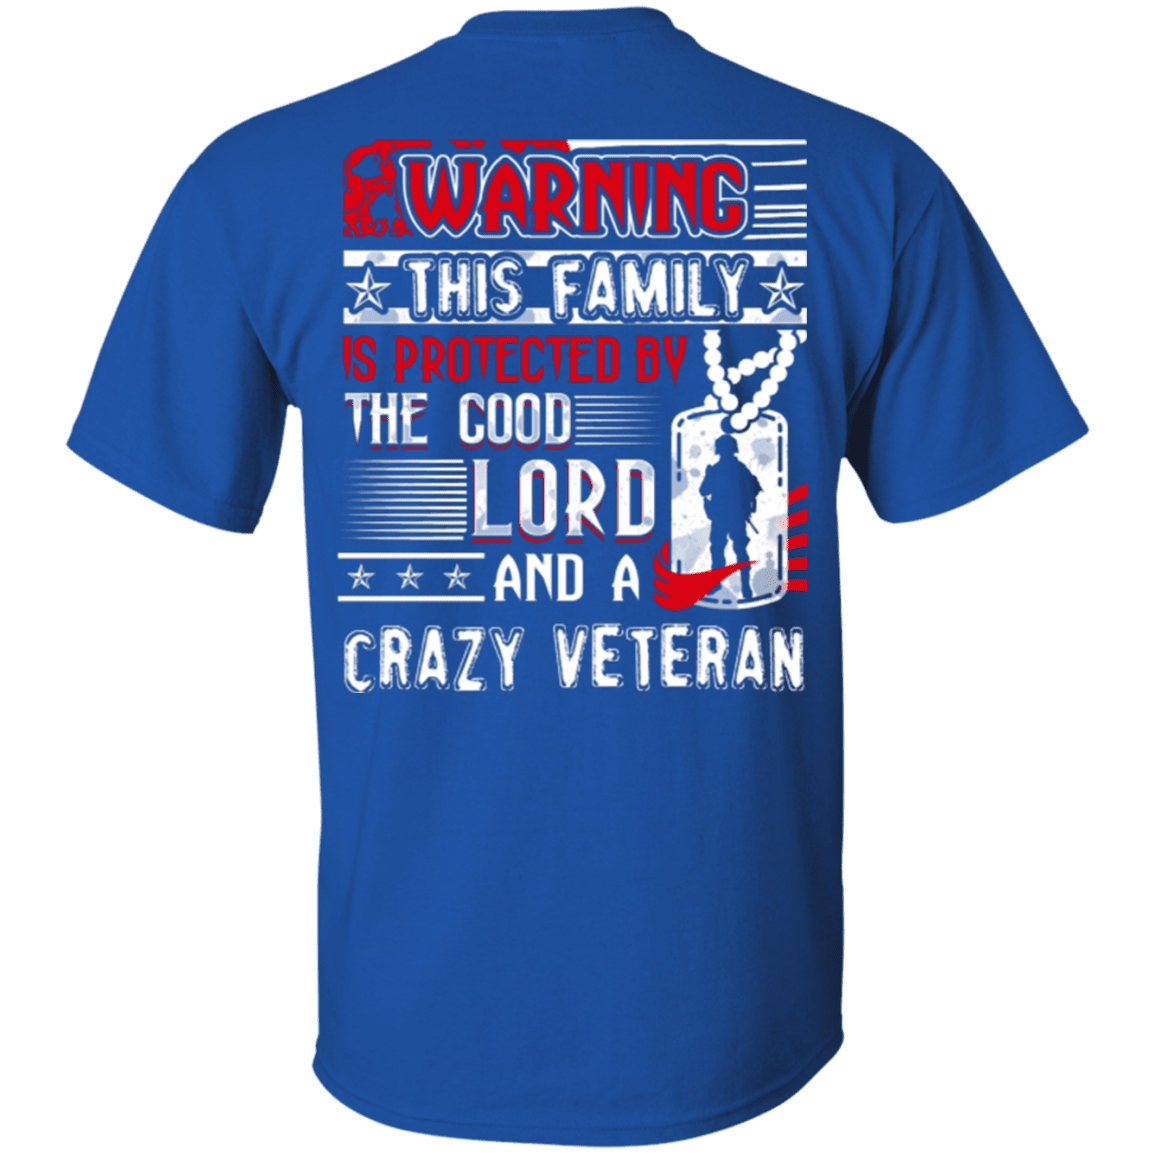 Military T-Shirt "The Good Lord And A Crazy Veteran"-TShirt-General-Veterans Nation